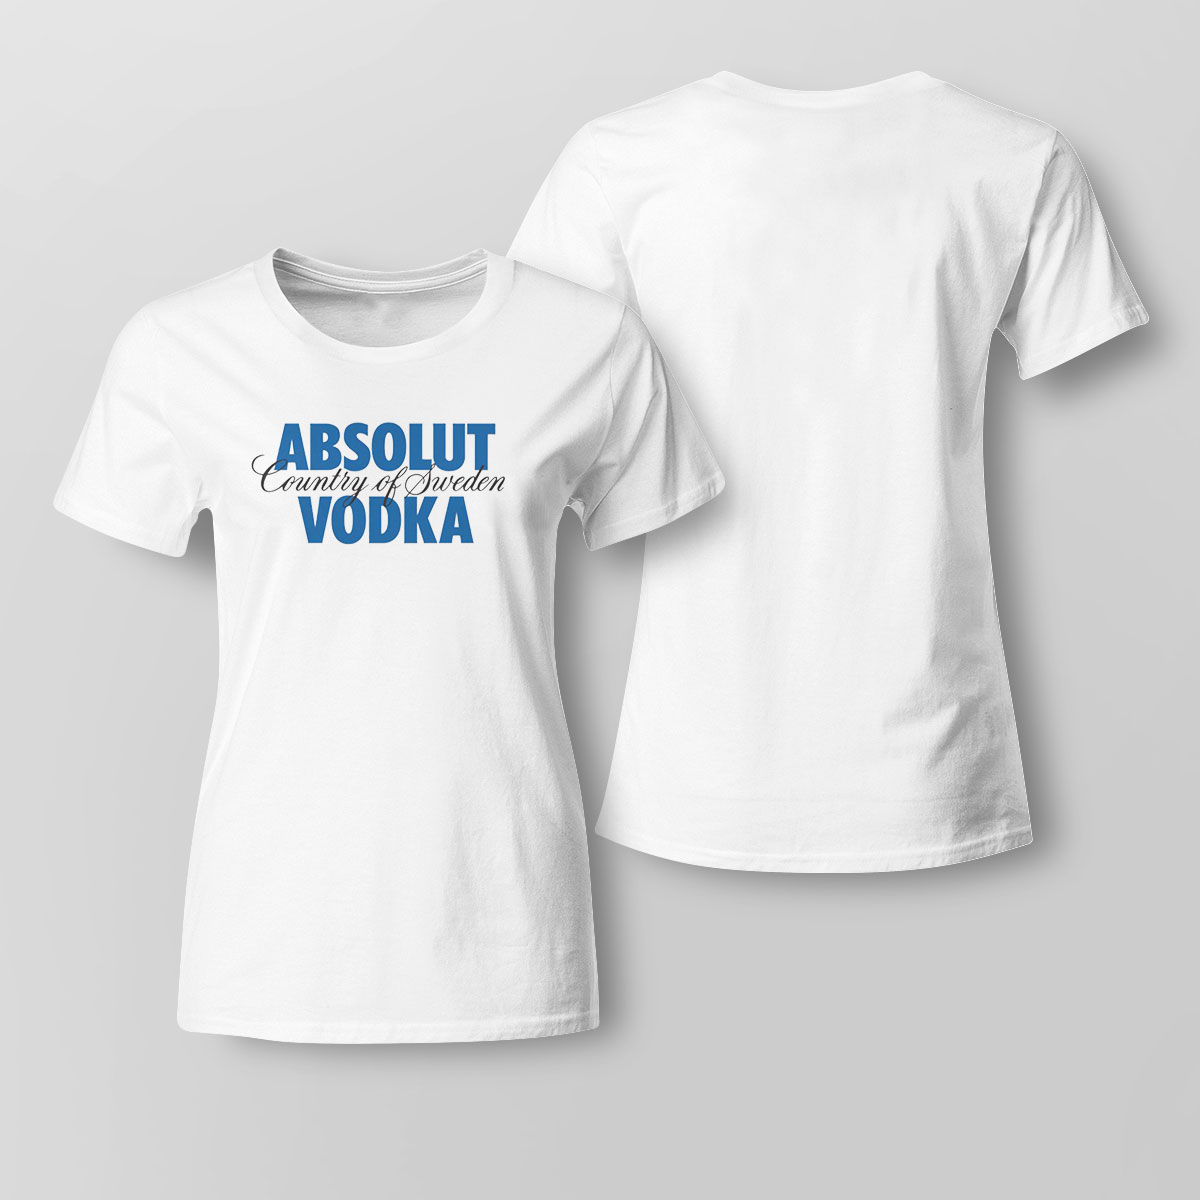 Absolutly Country Sweden Blue Vodka Shirt Hoodie